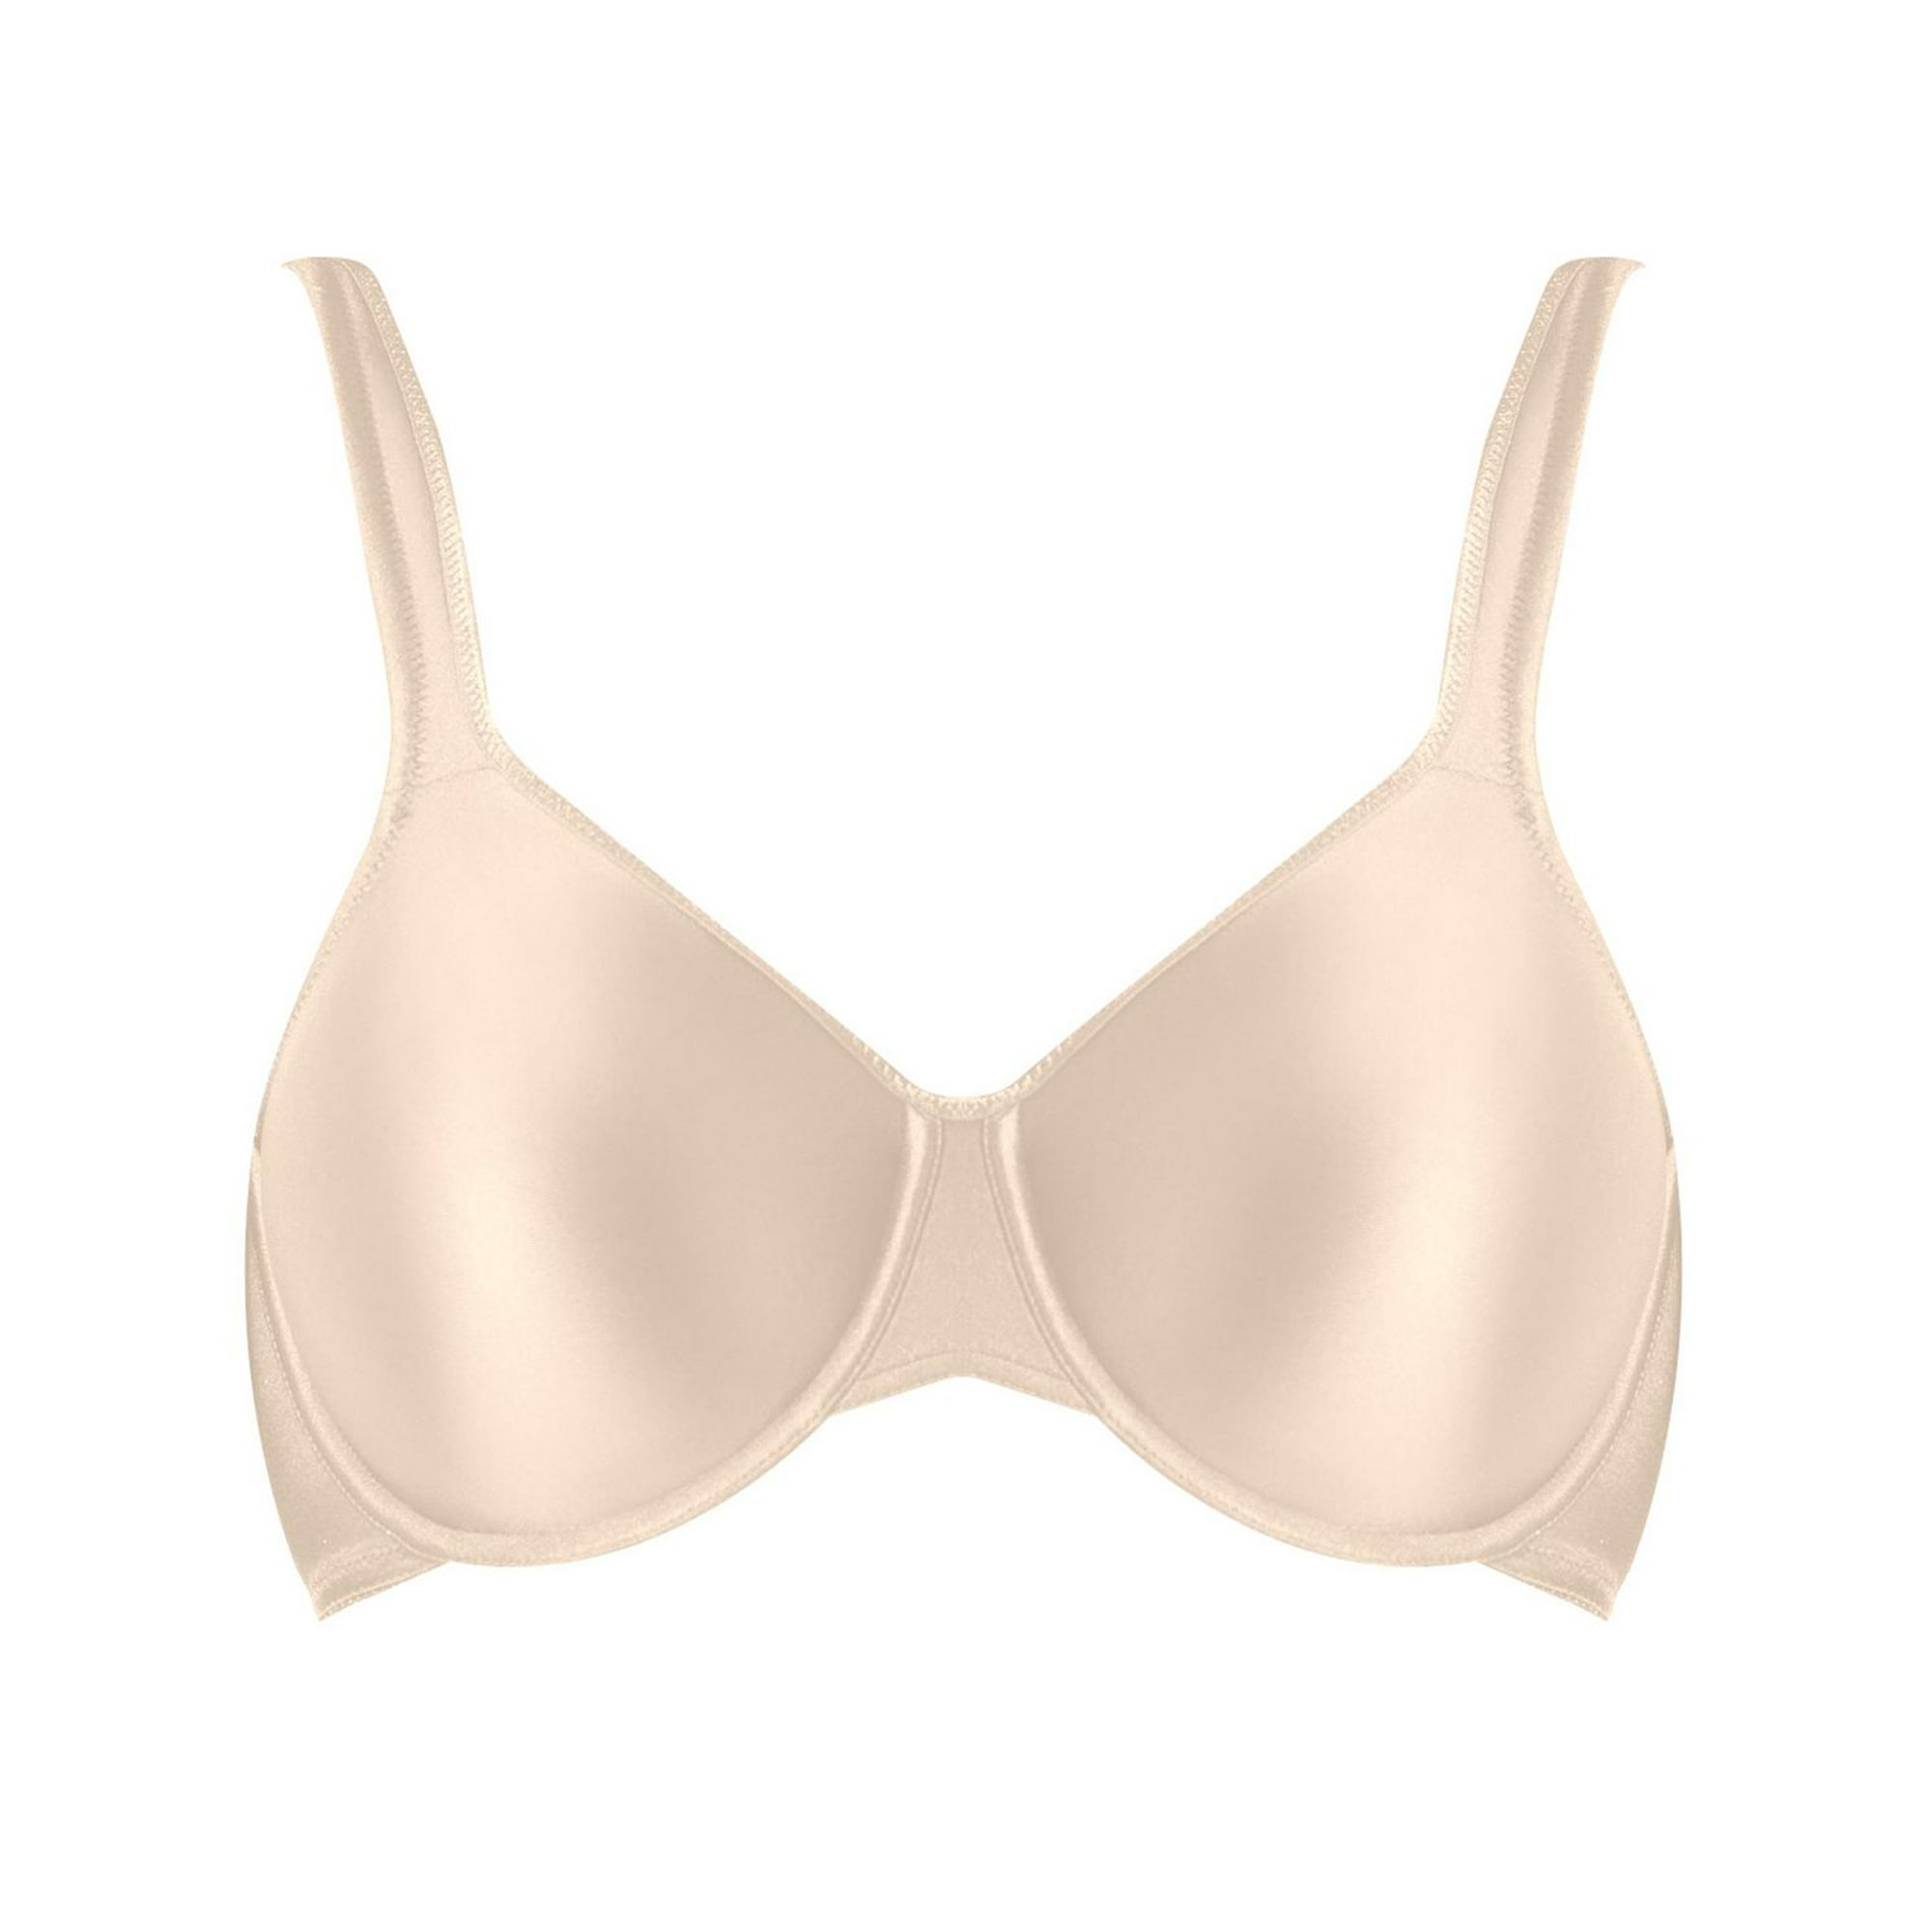 Secret Treasures women's plus size 44D underwire t-shirt bra ivory new  comfy * - $20 New With Tags - From Georgette